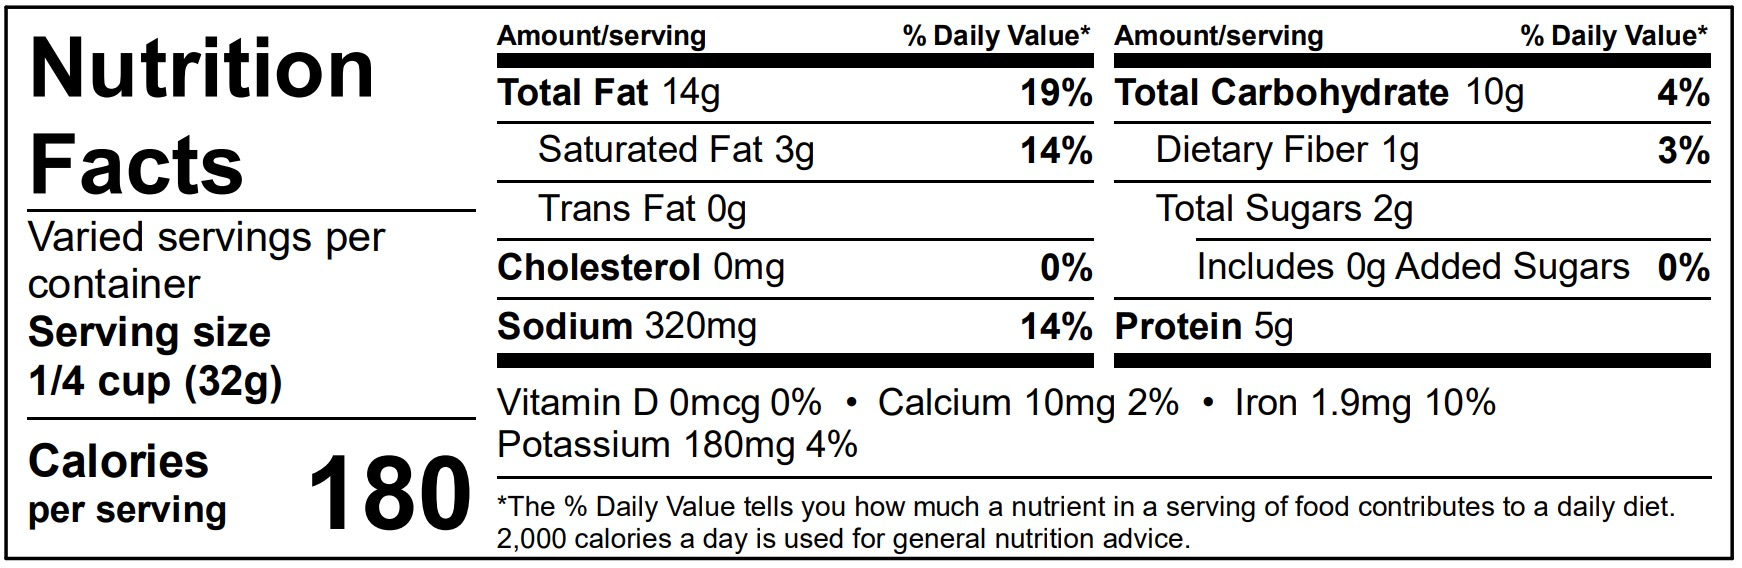 Roasted Salted Cashews Nutrition Label